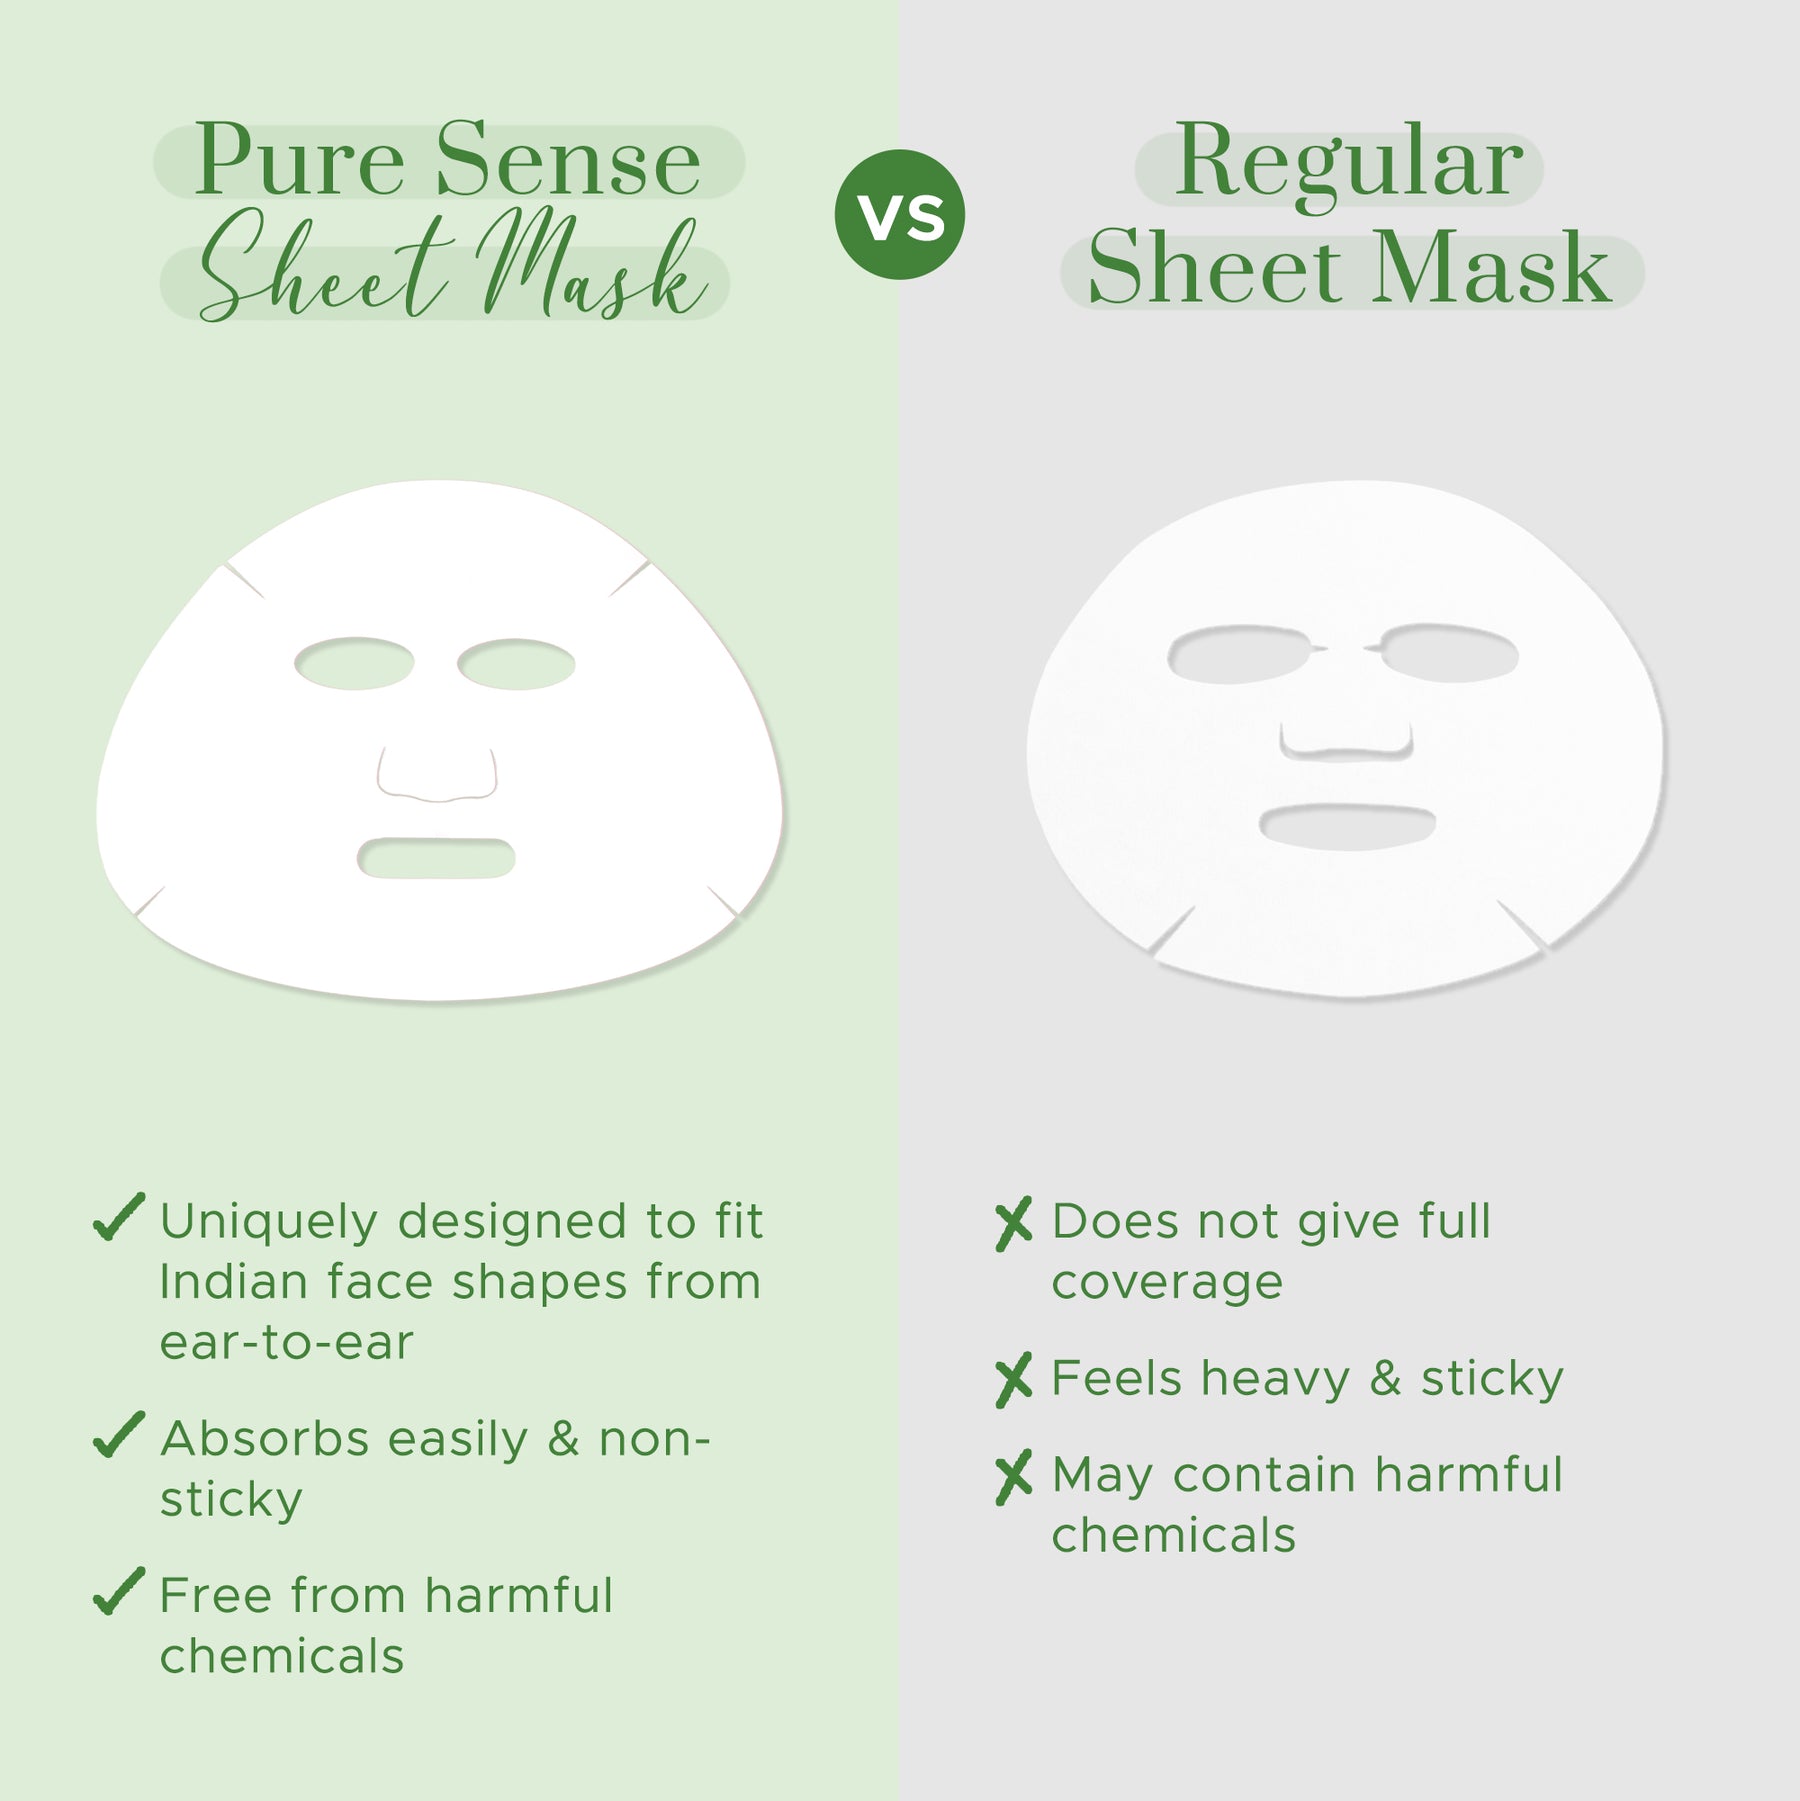 Nourishing Sheet Mask with Aloe Vera & Cucumber | From the makers of Parachute Advansed | 15ml